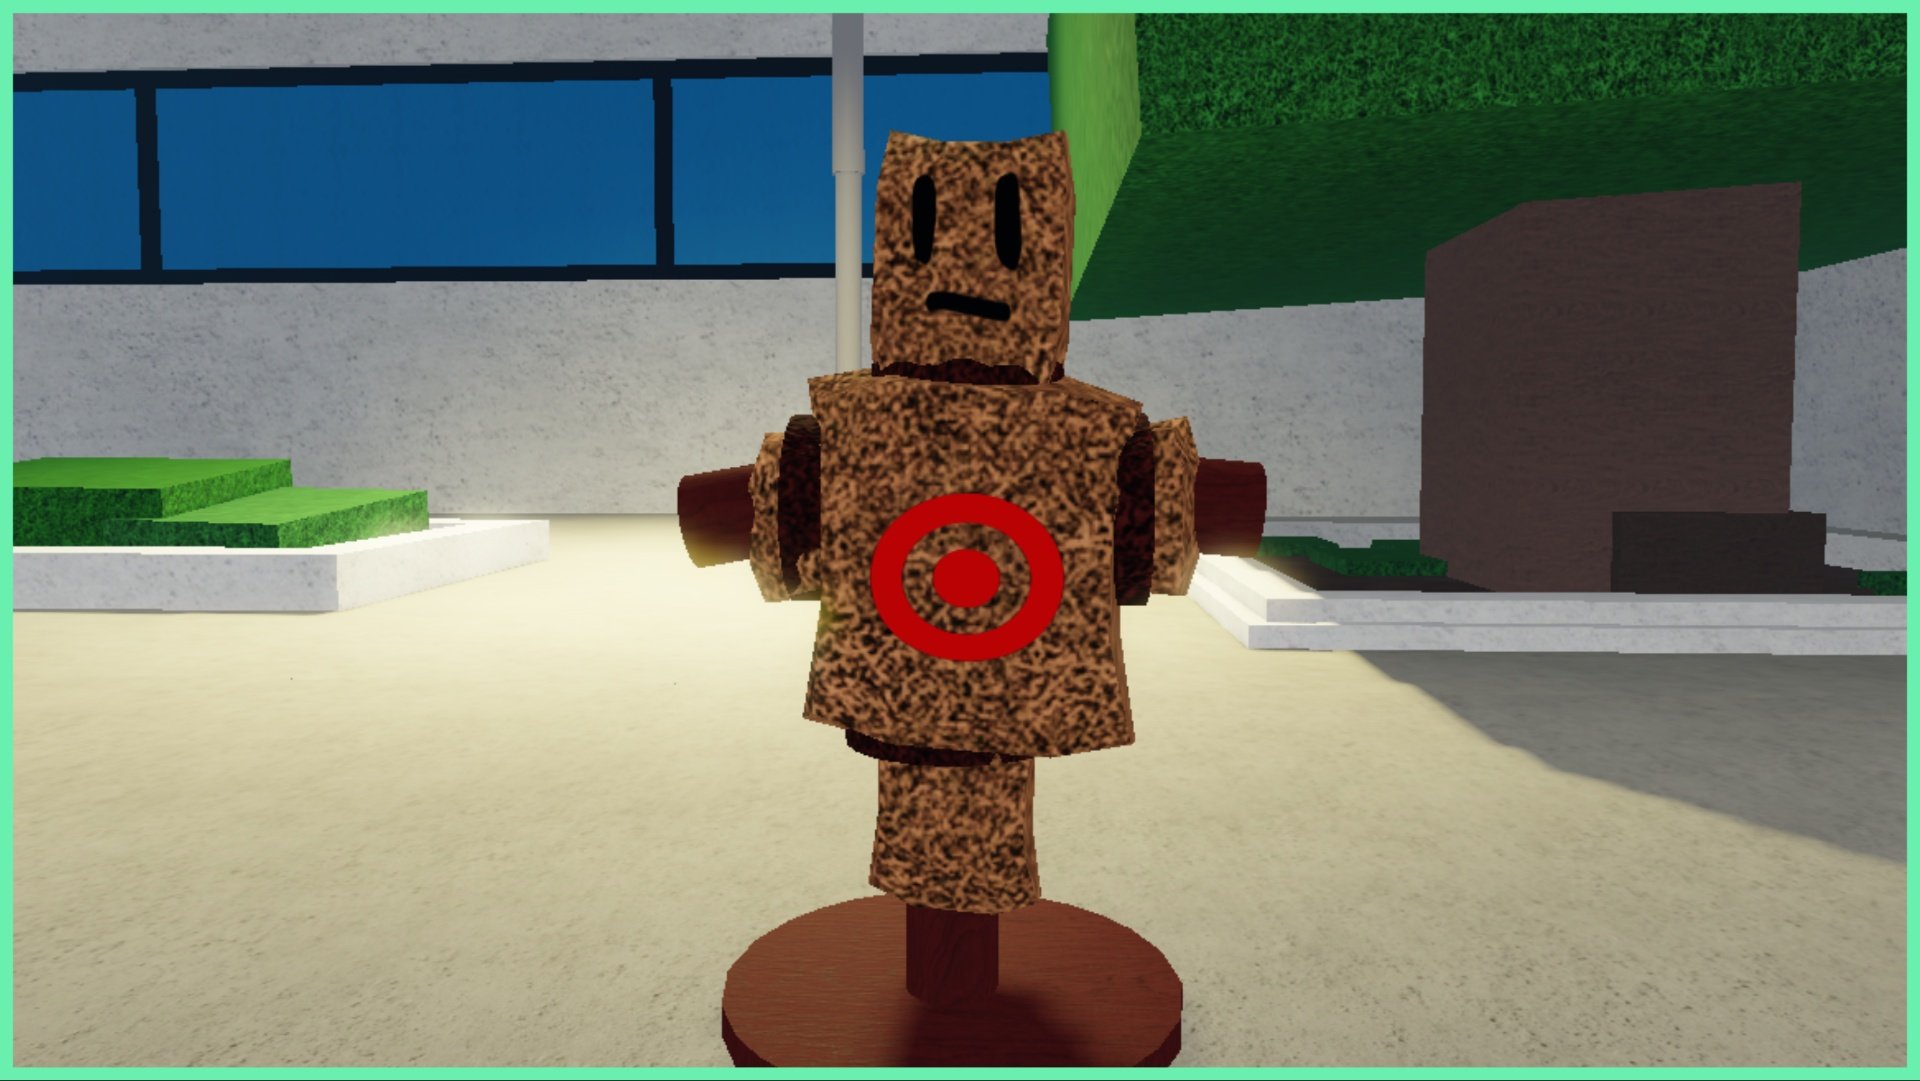 the image shows a training dummy during night time which looks to be made out of cork with a red target on its chest. Behind it is a city building and some trees